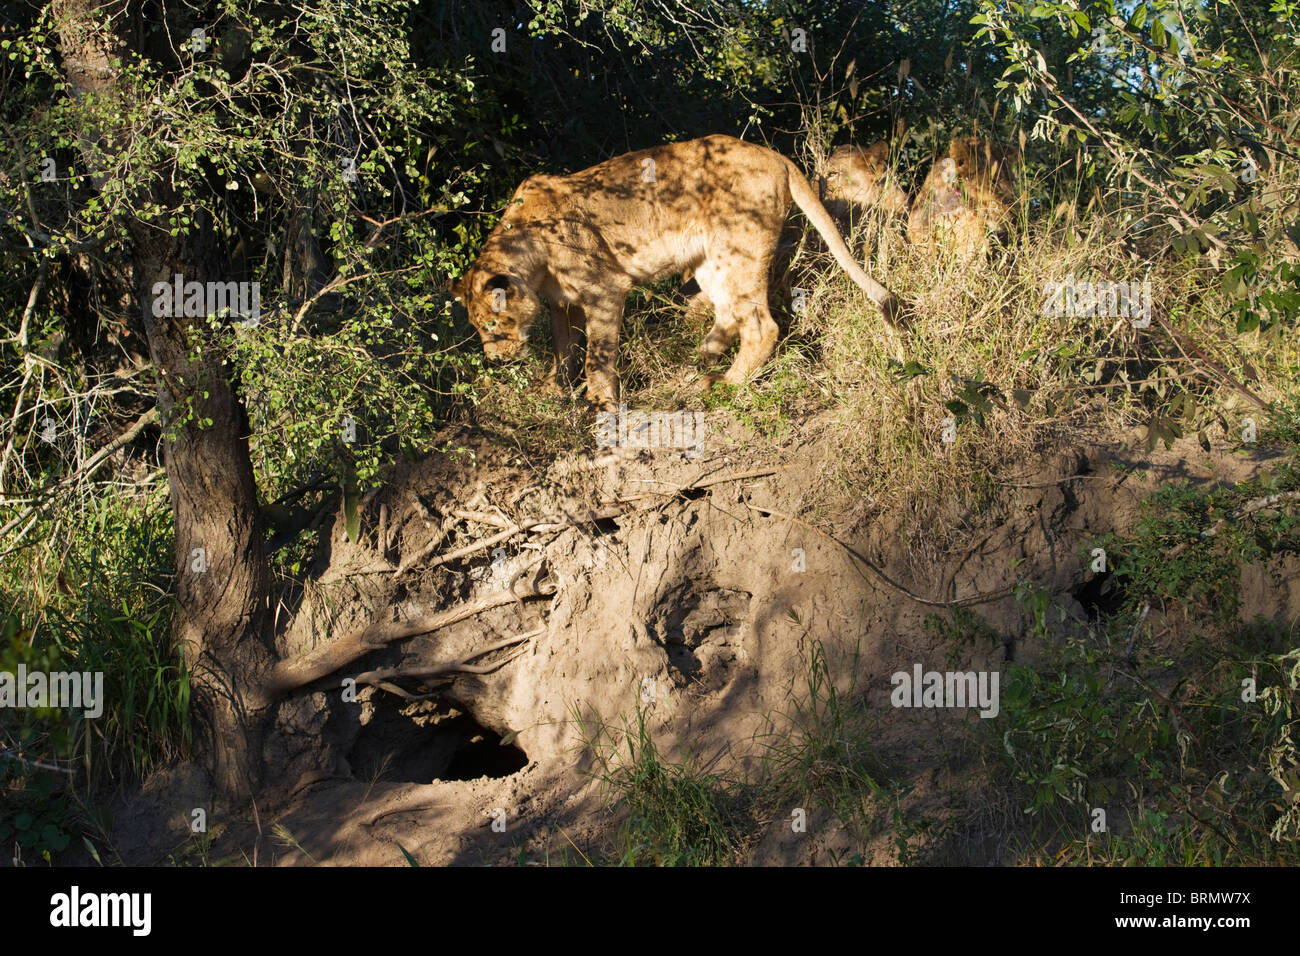 Lion standing on a termite mound looking down at a warthog burrow waiting for the hog to emerge Stock Photo